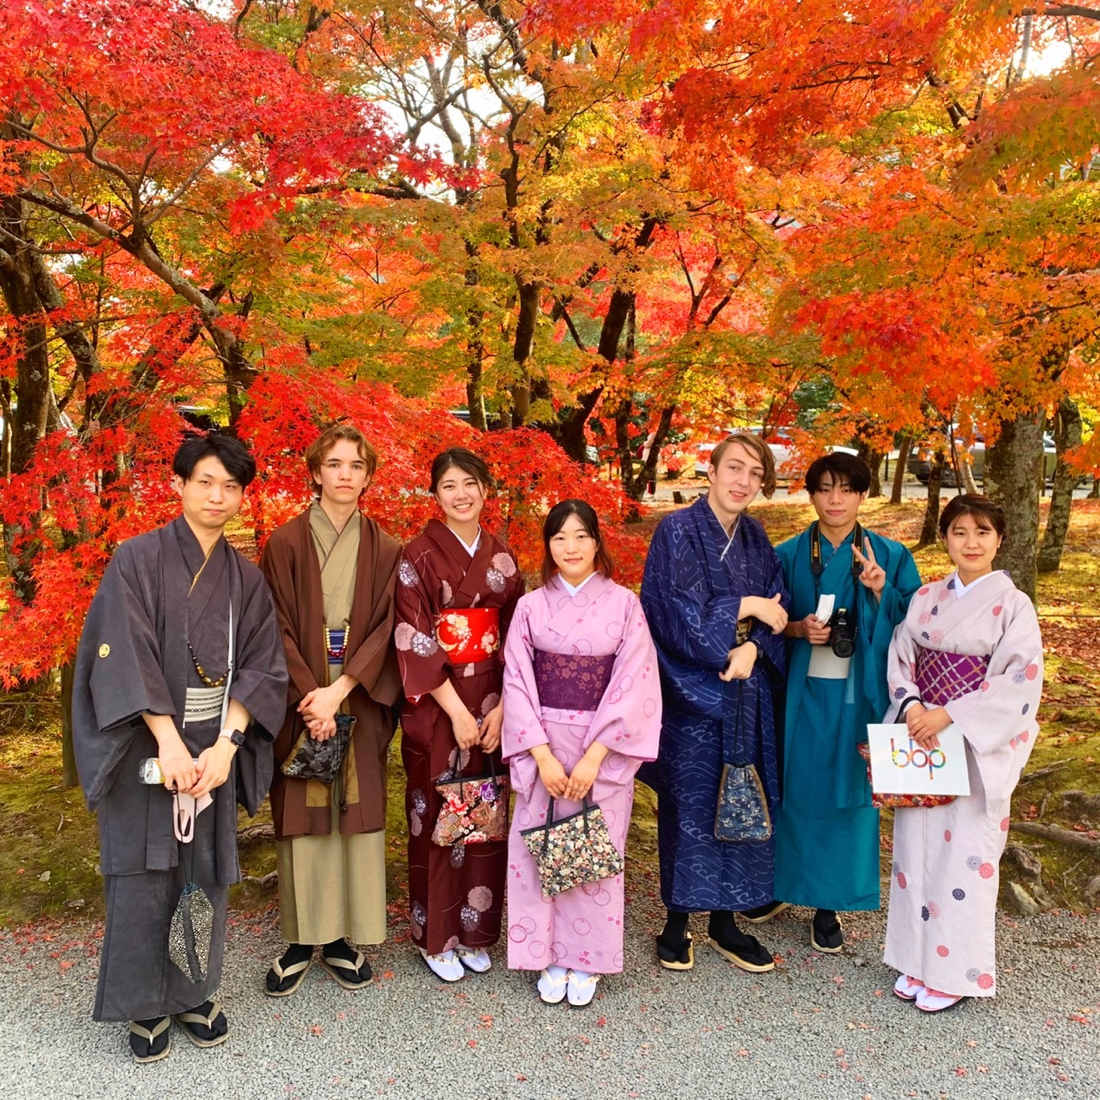 Students wear colorful kimonos in front of beautiful autumn foliage